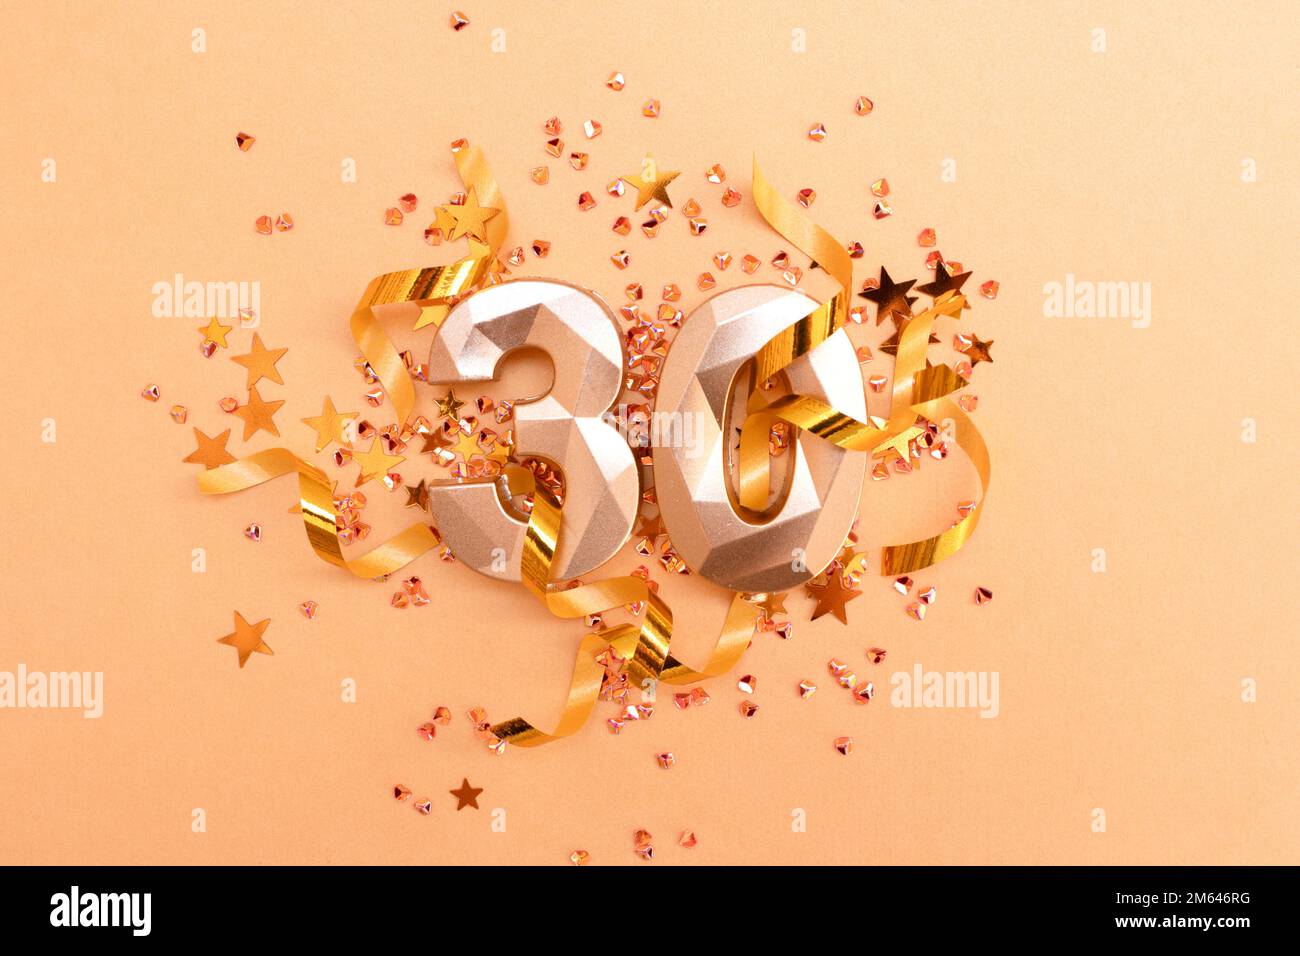 Gold colored number thirty, ribbons and stars confetti. Festive monochrome concept. Stock Photo